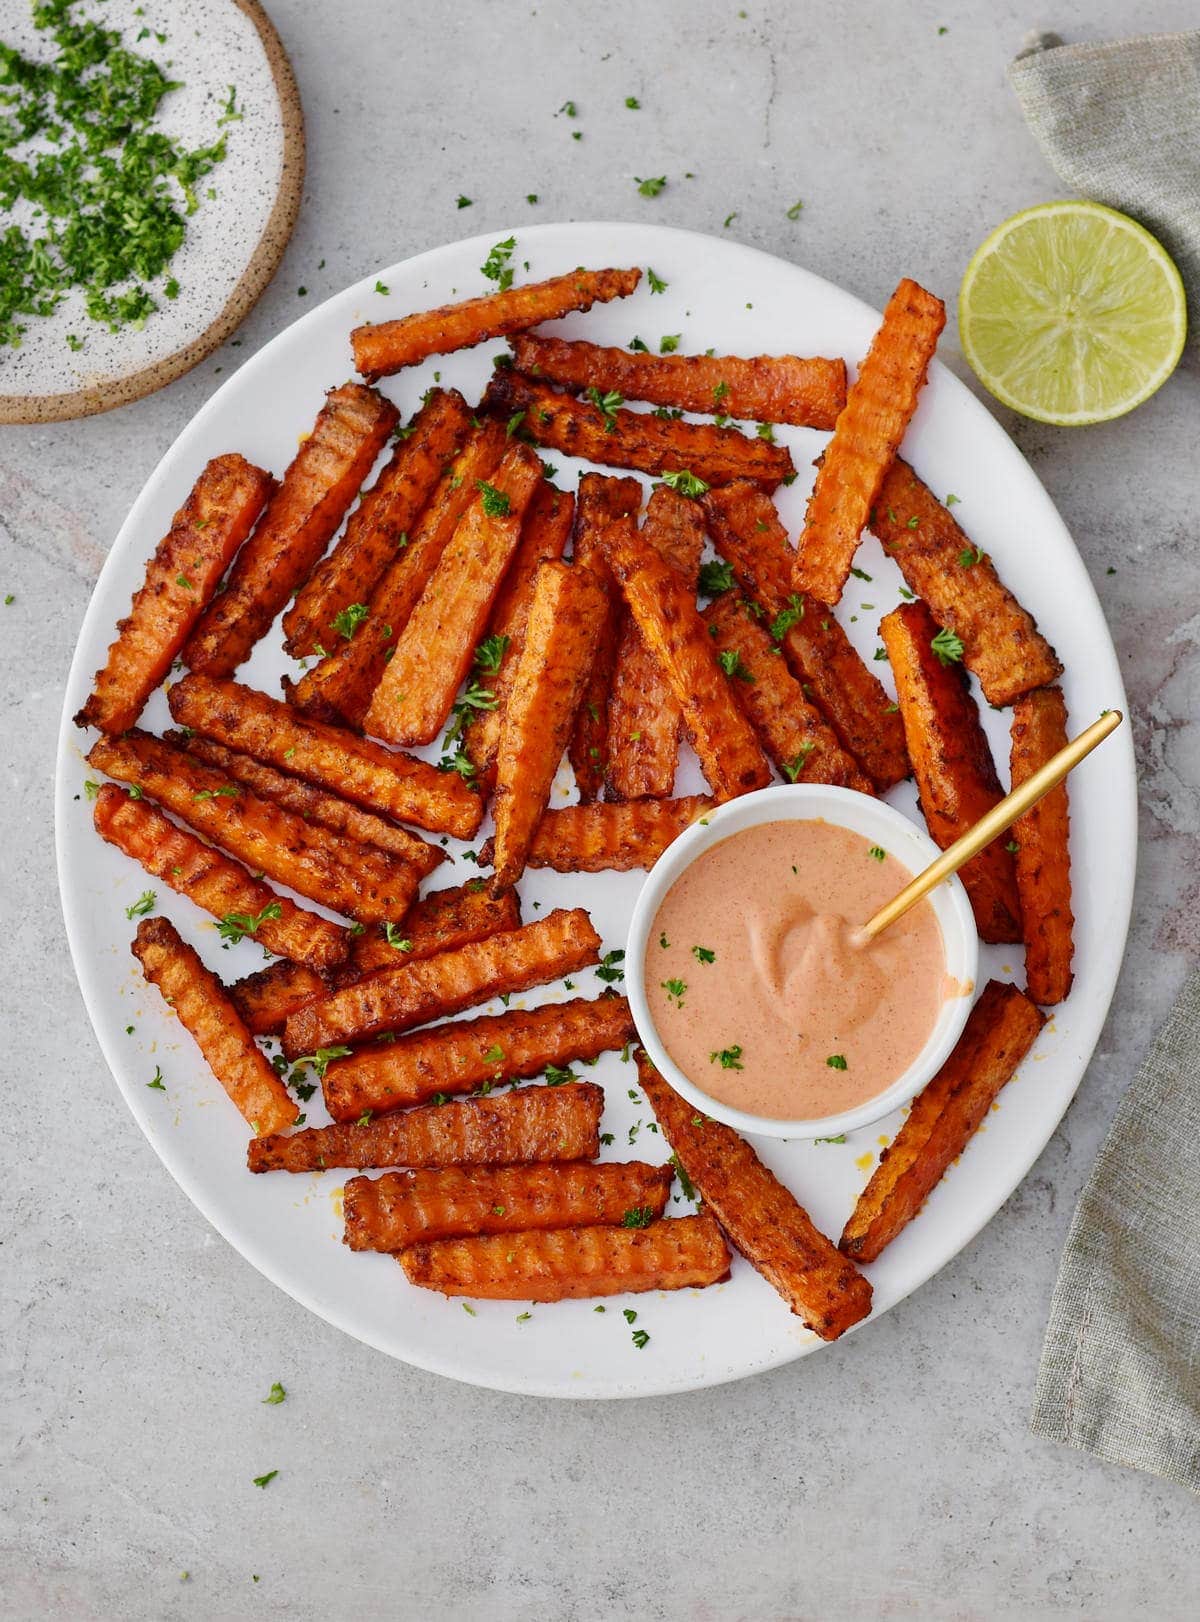 Carrot fries with pink dip on white plate